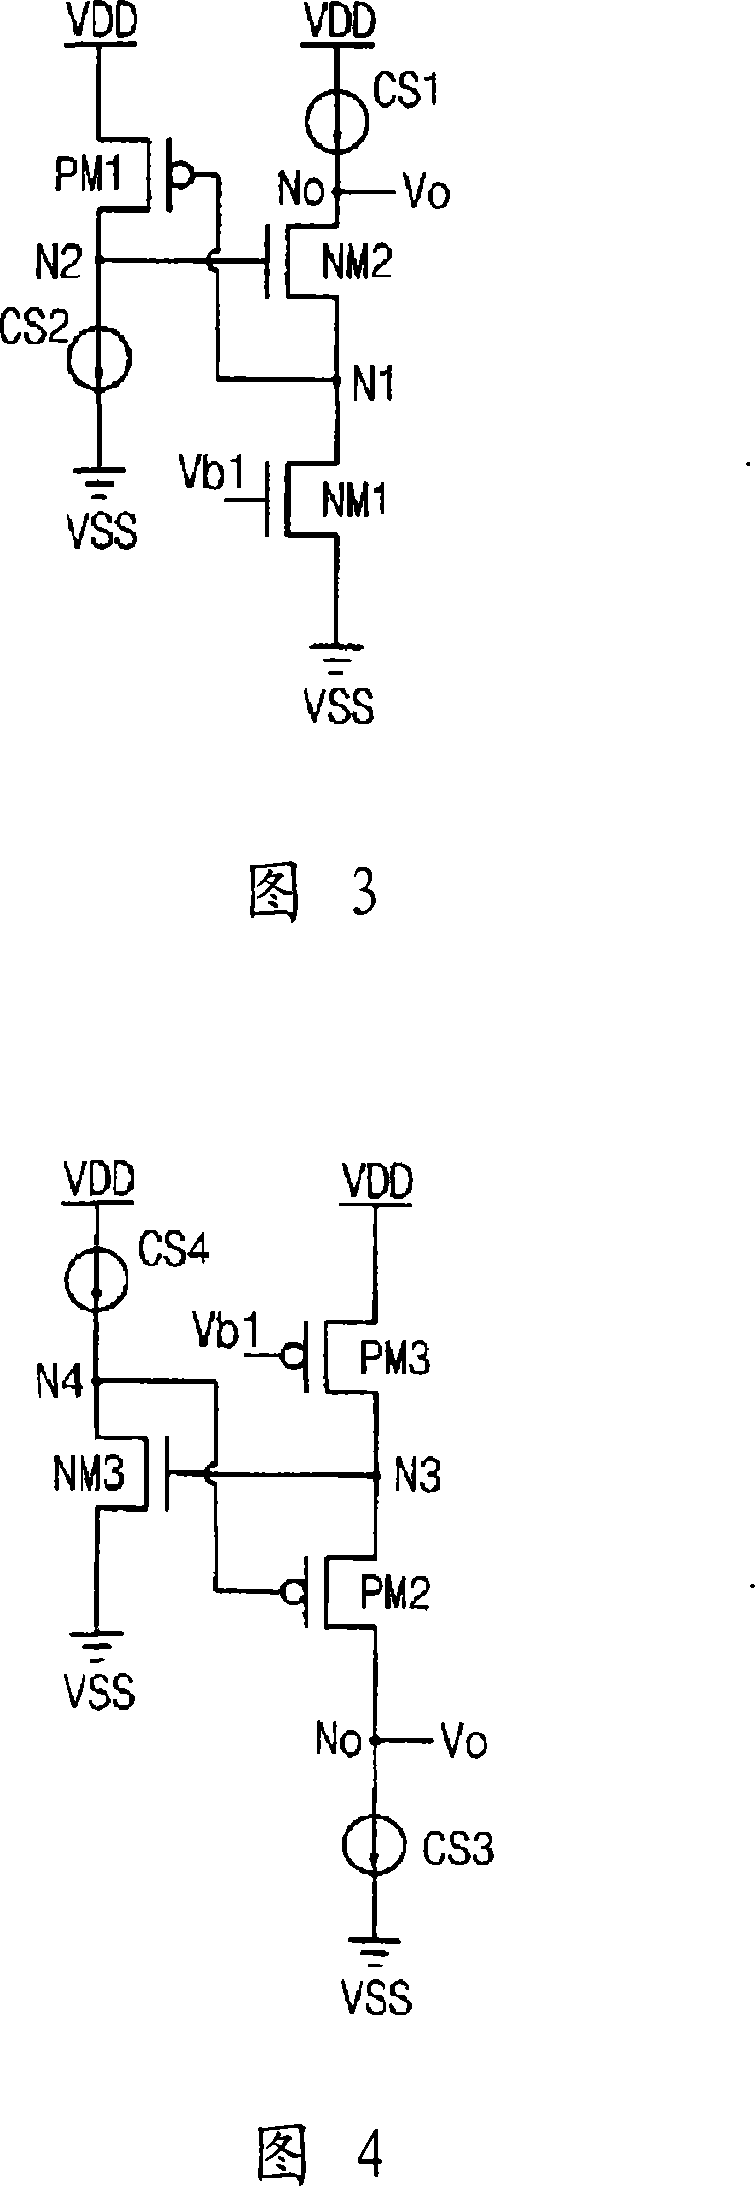 Regulated cascode circuits and cmos analog circuits include the same